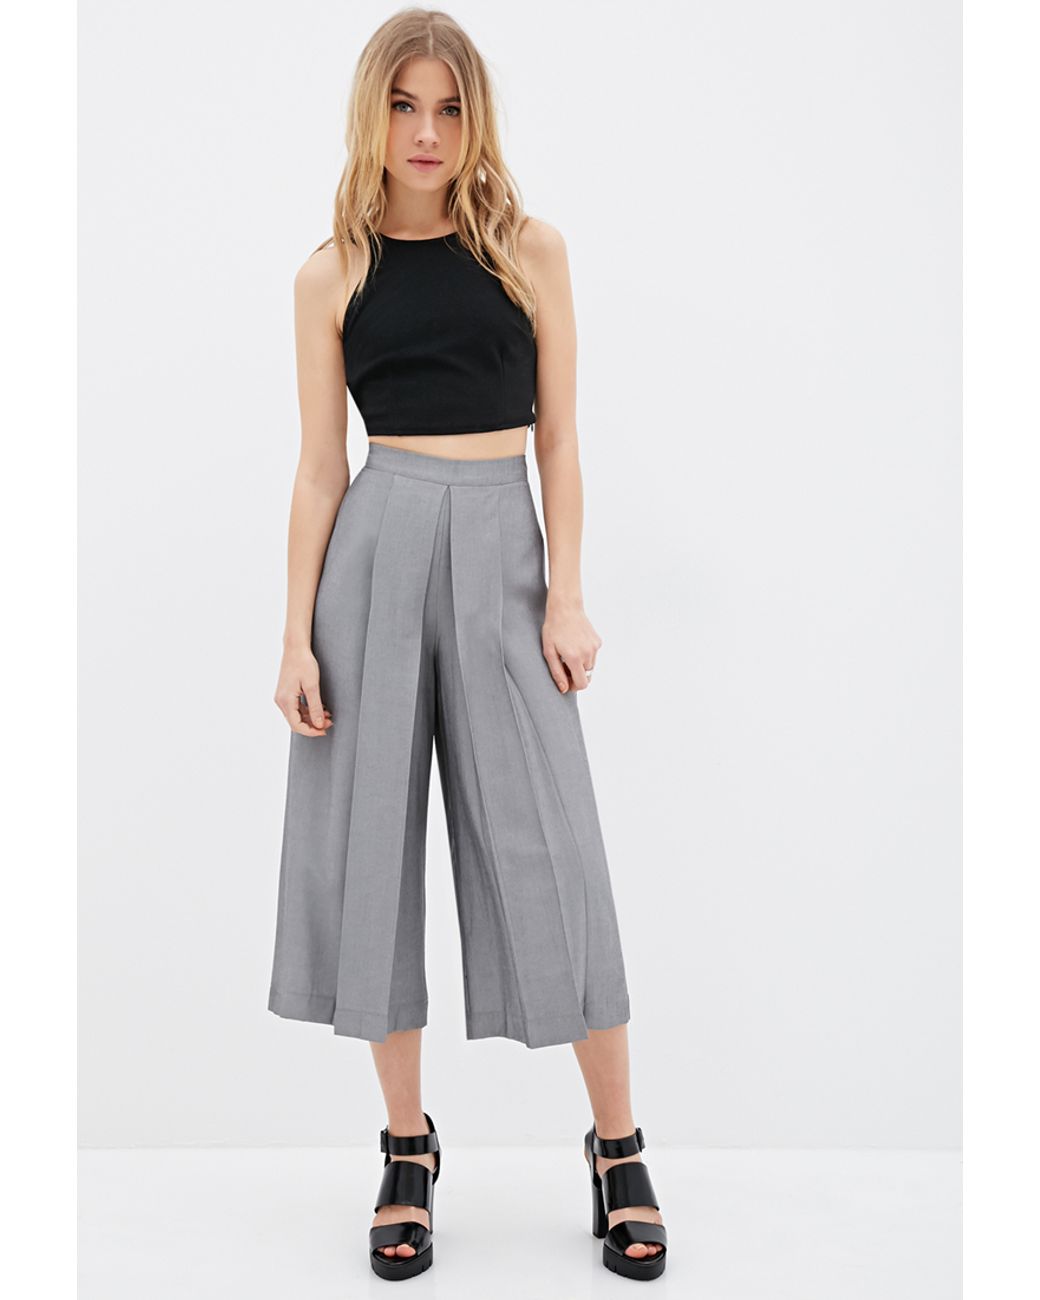 Forever 21 Box Pleated Culotte Pants in Grey (Gray) | Lyst